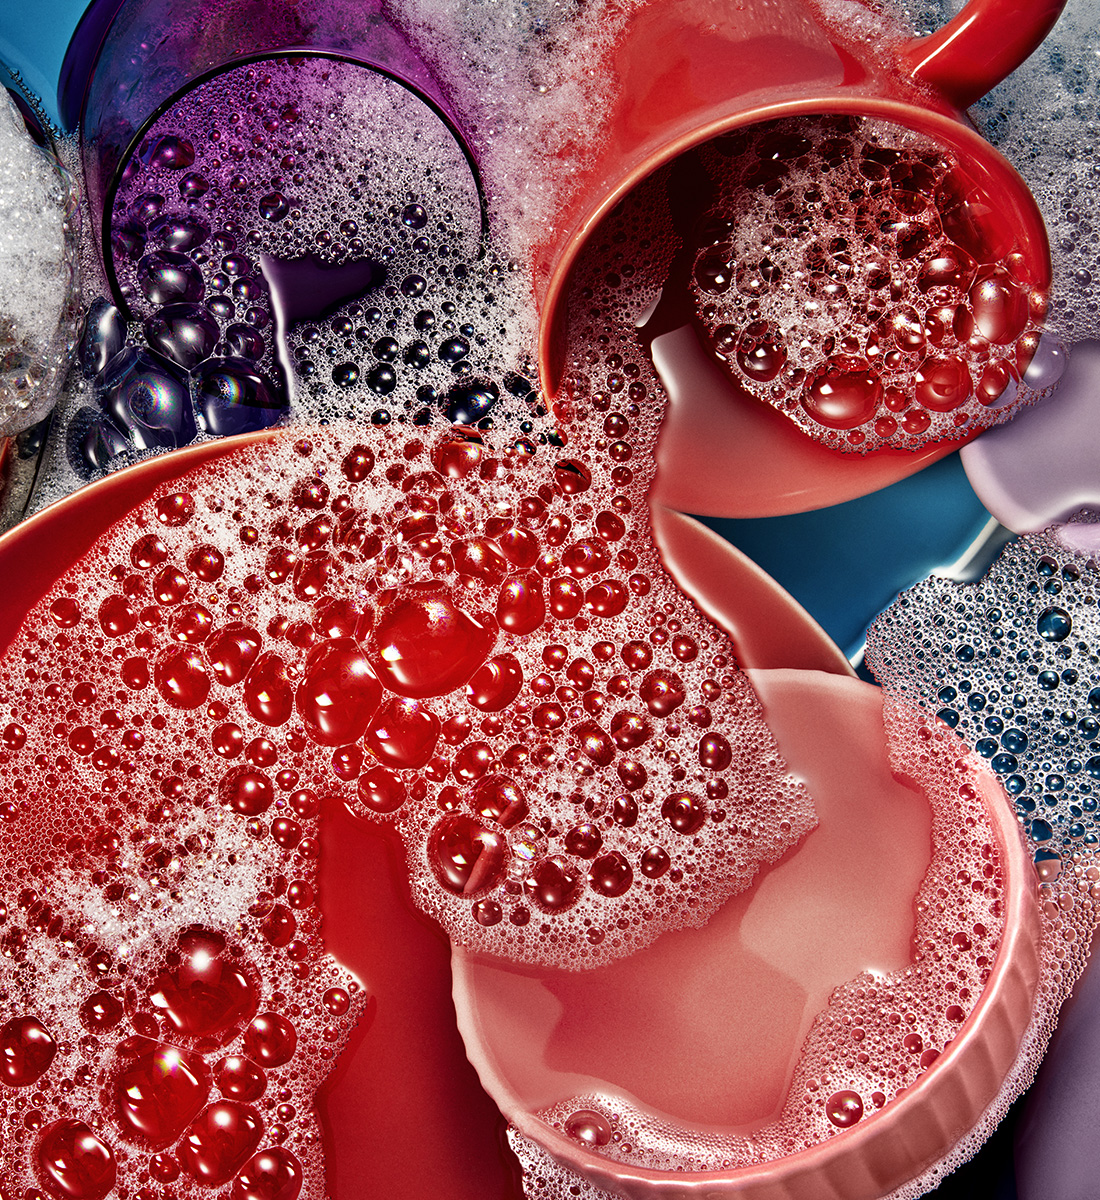 Colorful dishes in sudsy water.